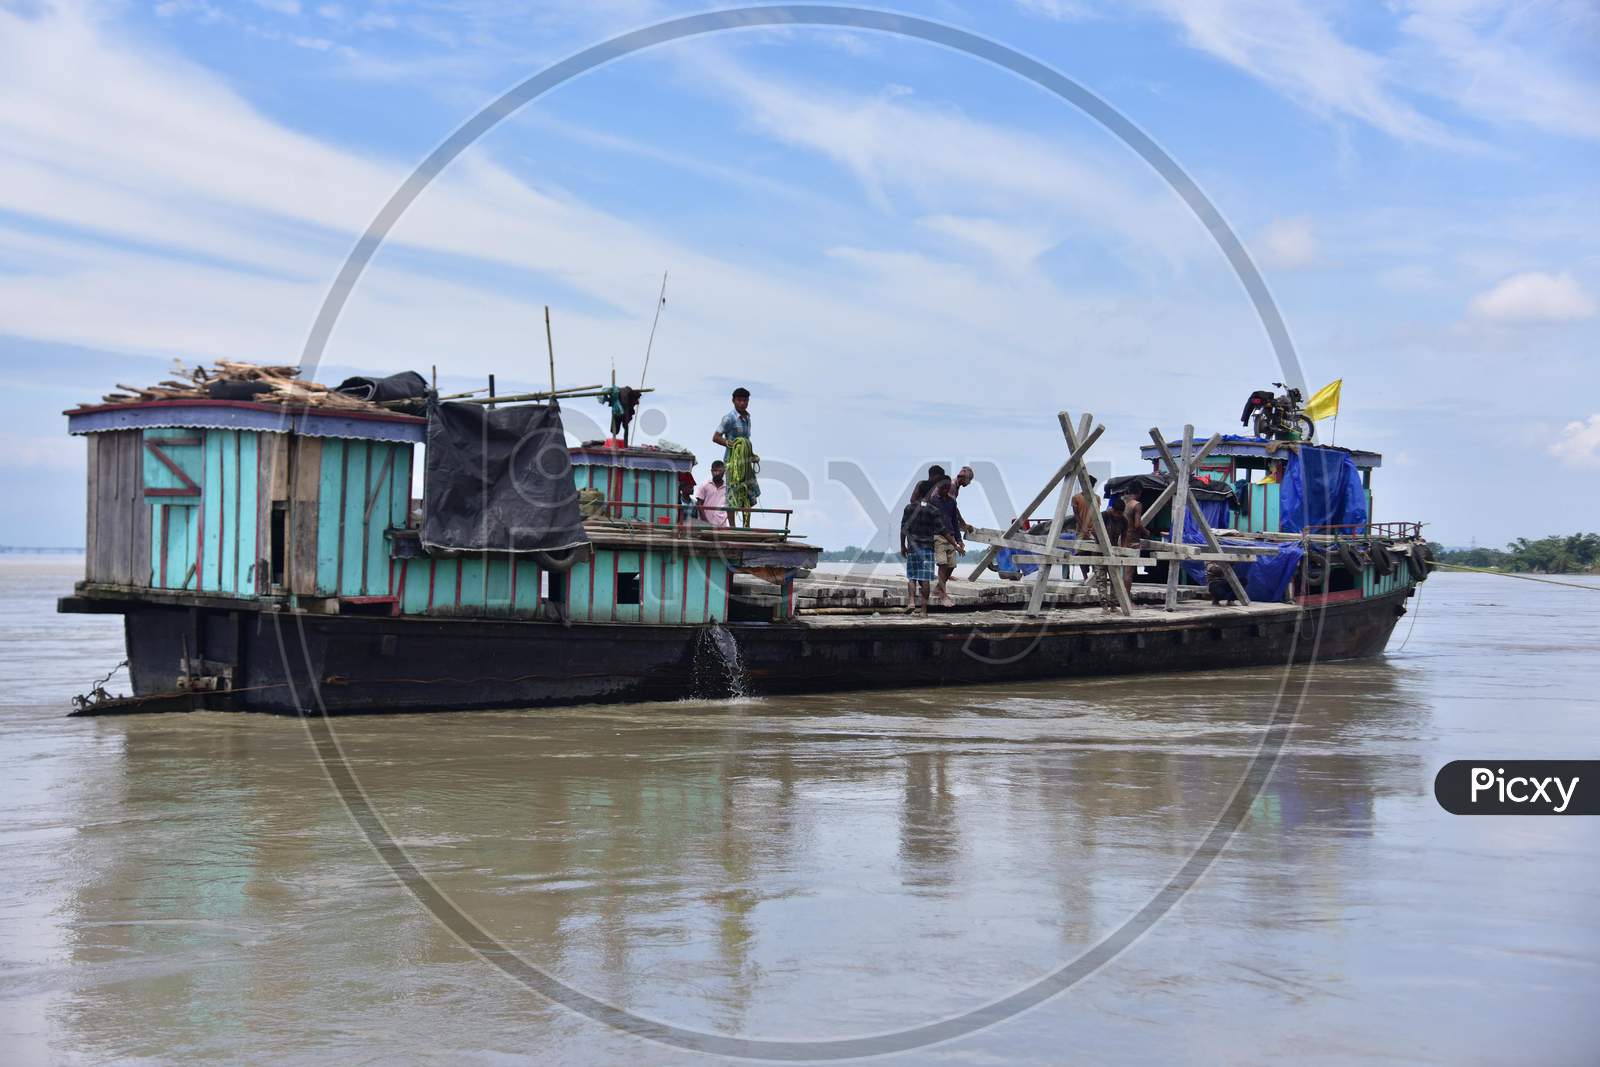 Public Works Department (PWD) Of Assam Labourer Throw Pillars From Boat At The Banks Of Brahmaputra River To Reduce Soil Erosion At Bhurbandha Village, In Nagaon District Of Assam On July 25, 2020.